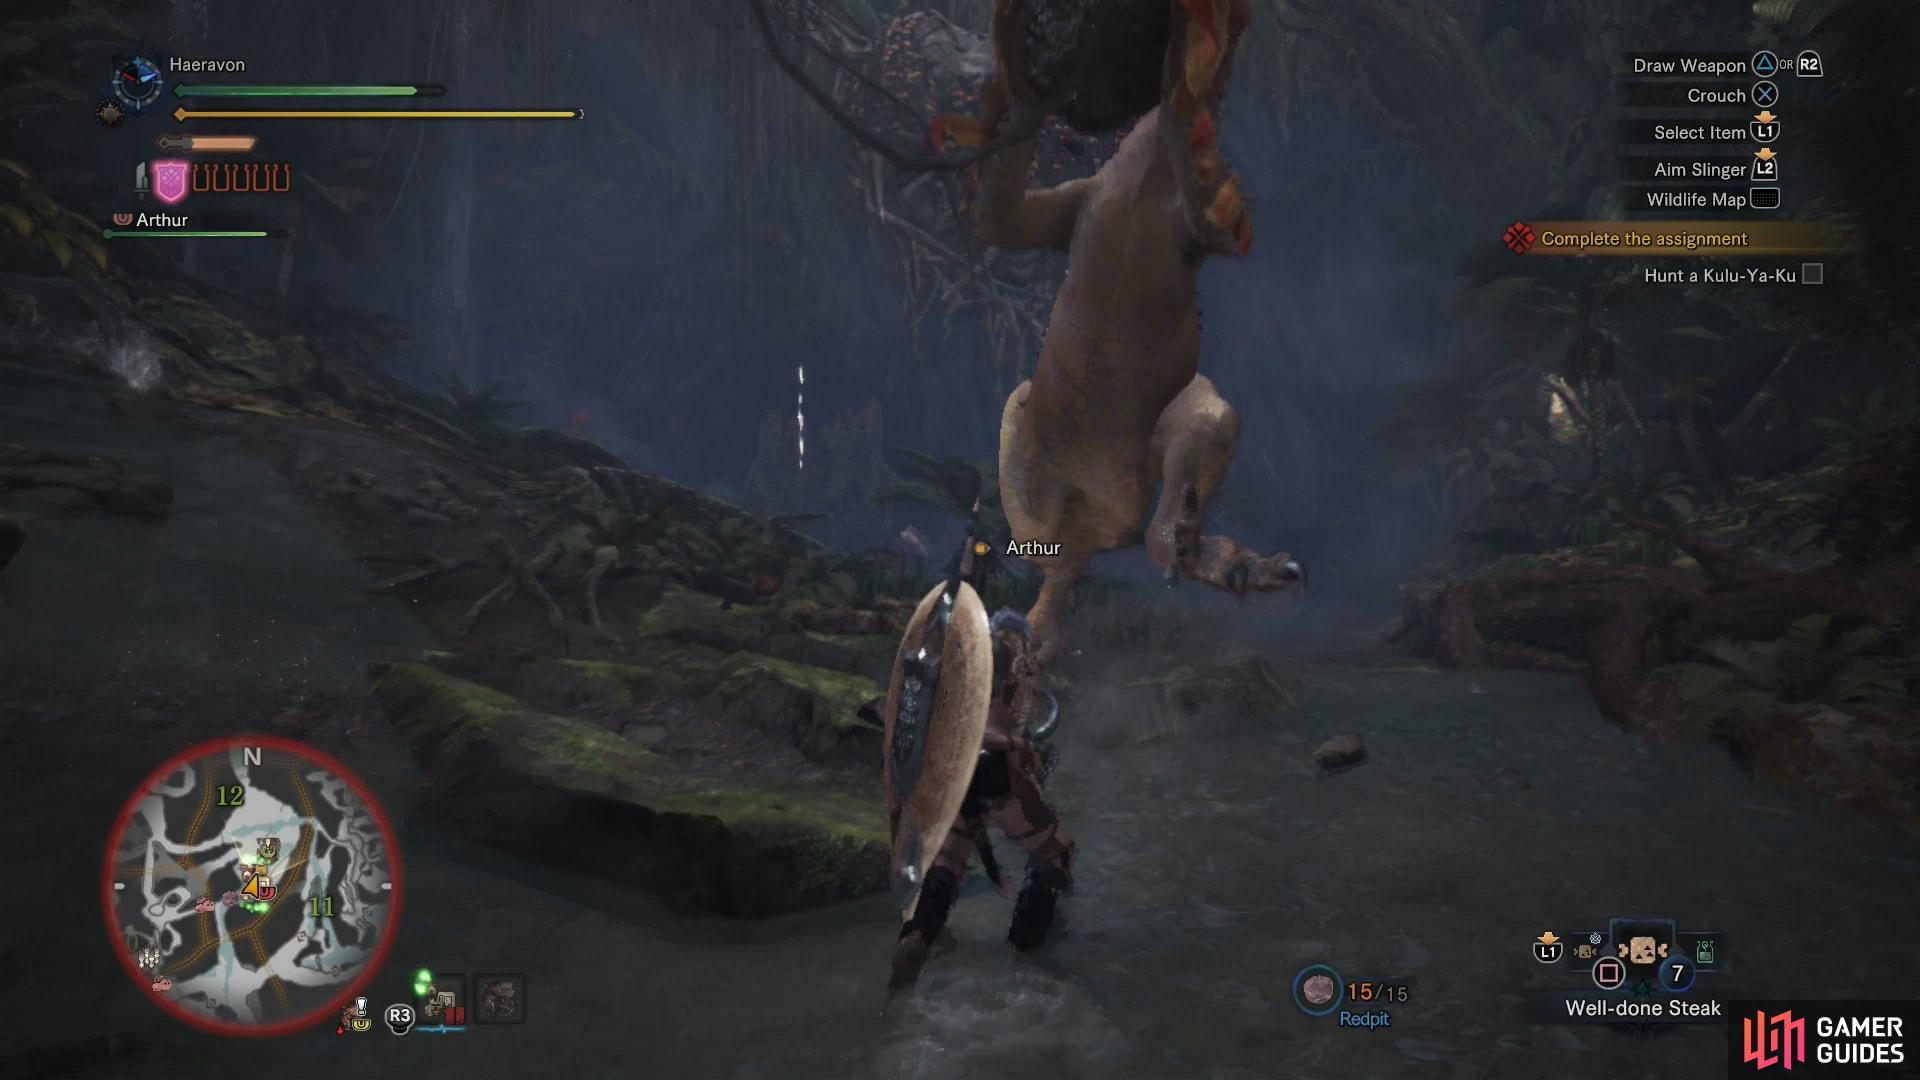 When armed with a boulder, the Kulu-Ya-Ku may use a devastating leap attack